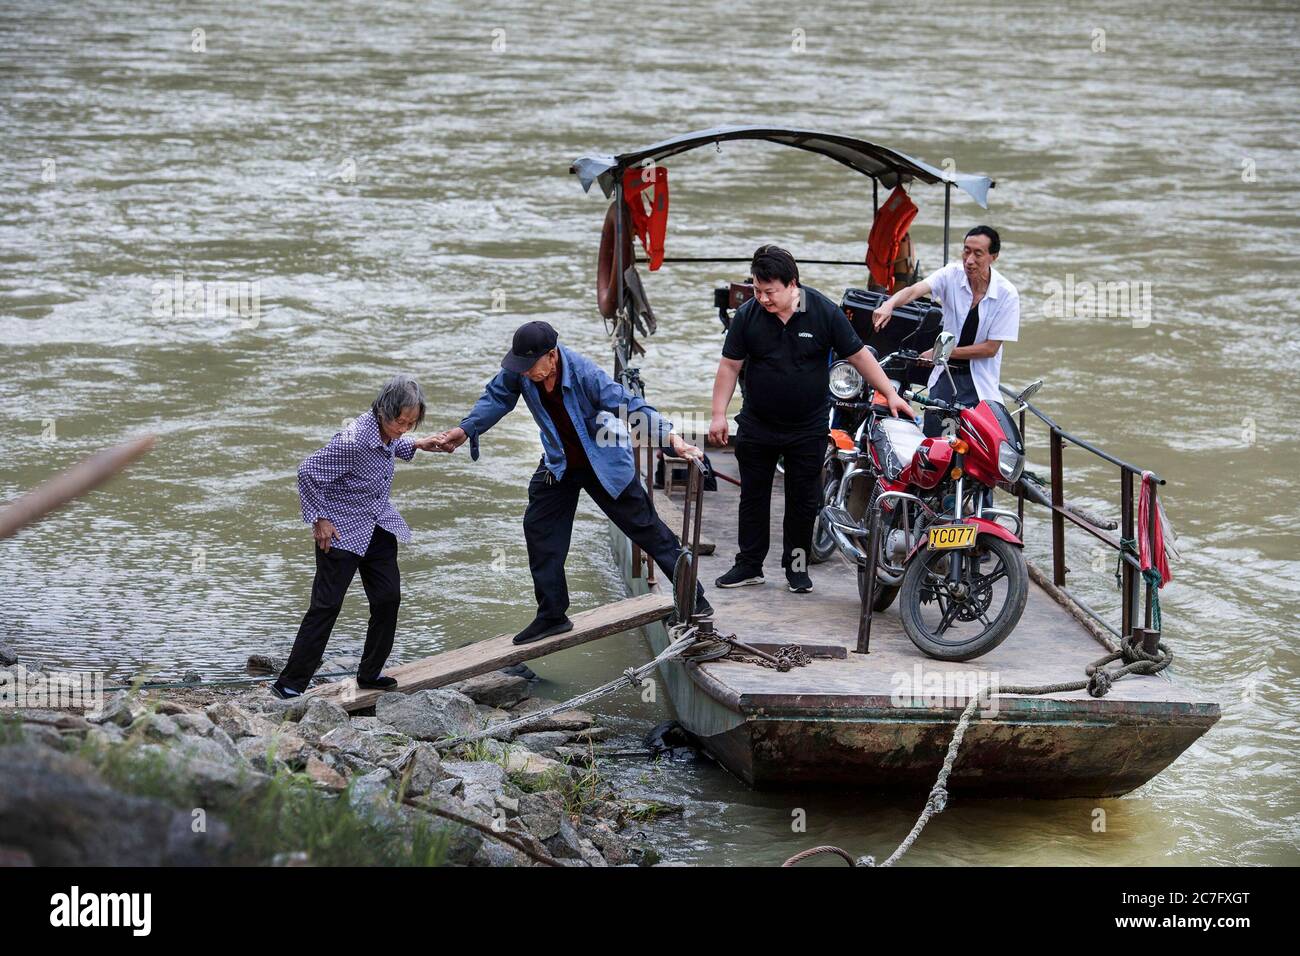 (200717) -- YANGXIAN, July 17, 2020 (Xinhua) -- Han Wenixn (2nd L) helps an elder board the boat at the Miaoshang crossing in Huangjinxia Town, Hanzhong City of northwest China's Shaanxi Province, July 16, 2020. Han Wenxin, 71, a ferryman for 60 years at the Miaoshang crossing, a 100-year-old crossing in Huangjinxia Town, stuck to his position every day despite of the weather and whenever the villagers needed him, and charged no money from his impoverished clients. In 2018, Han Wenxin broke his feet and called his son Han Baocheng back to continue his business. Although earning few money, Han Stock Photo